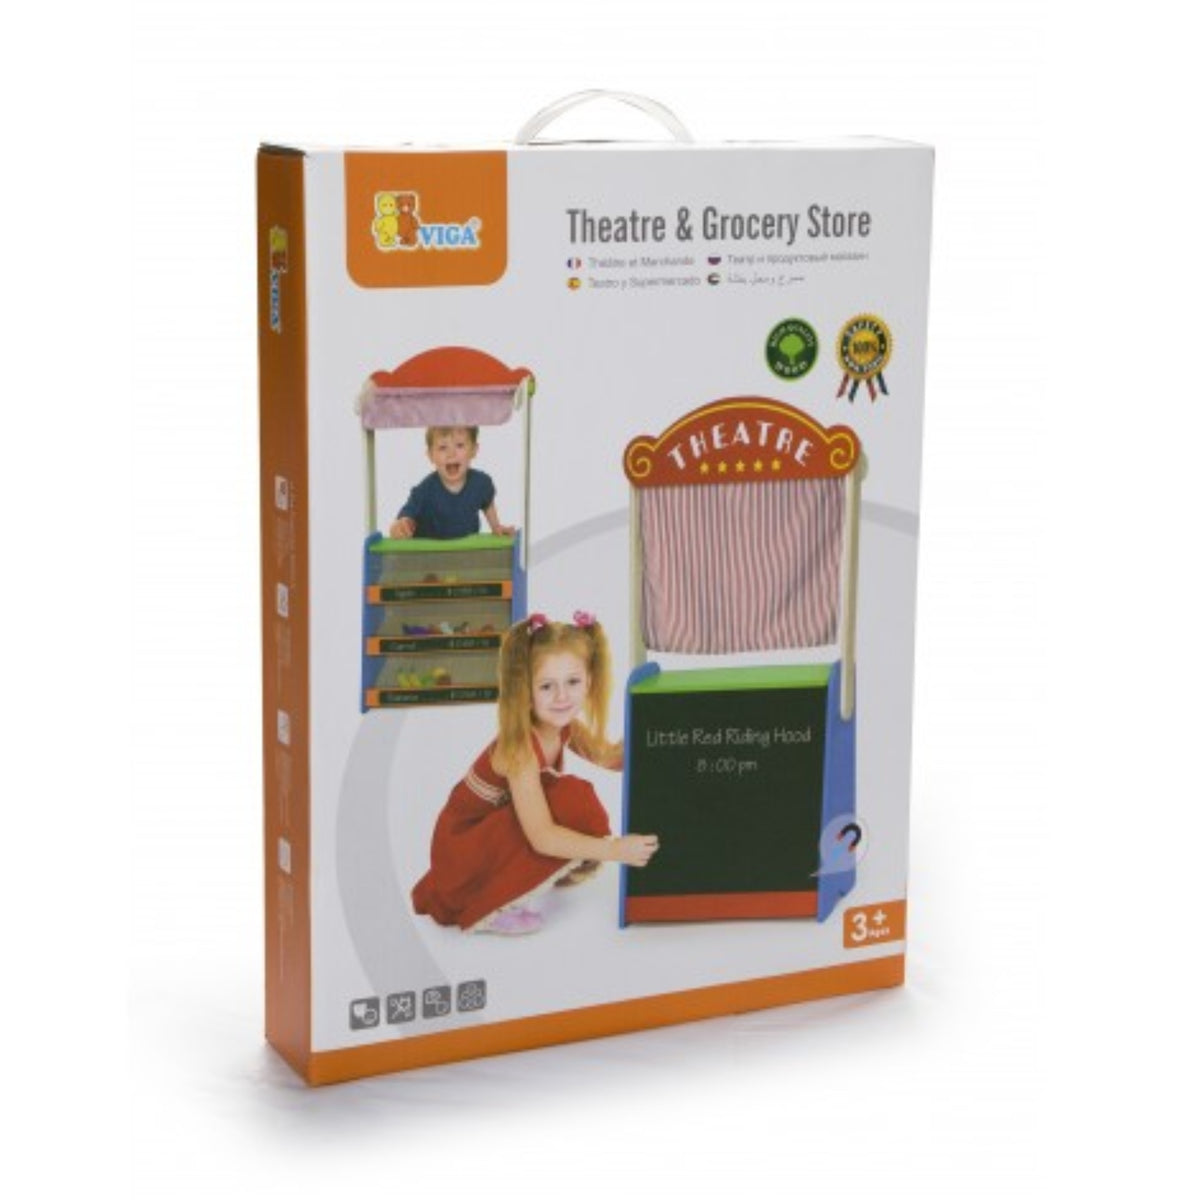 Theatre & Grocery Store Playset